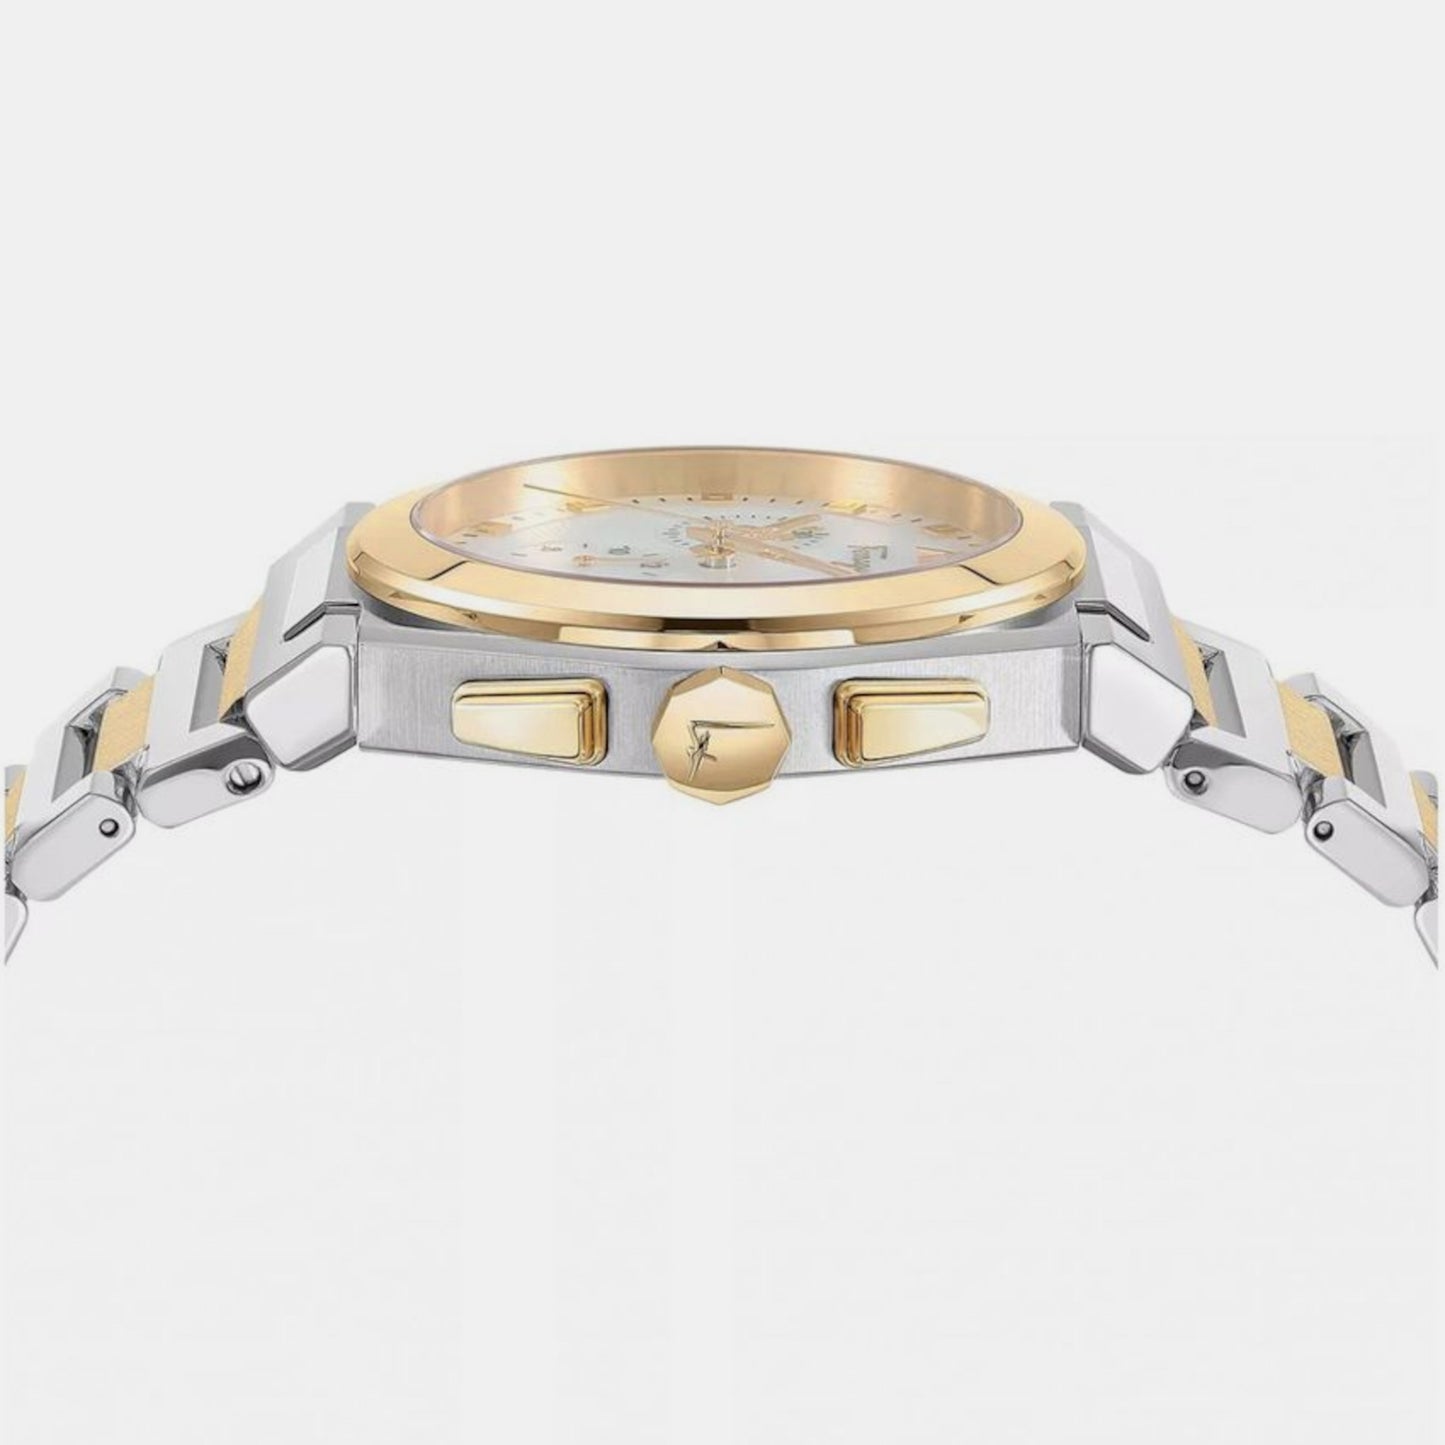 Female Mother Of Pearl Chronograph Stainless Steel Watch SFKL00423